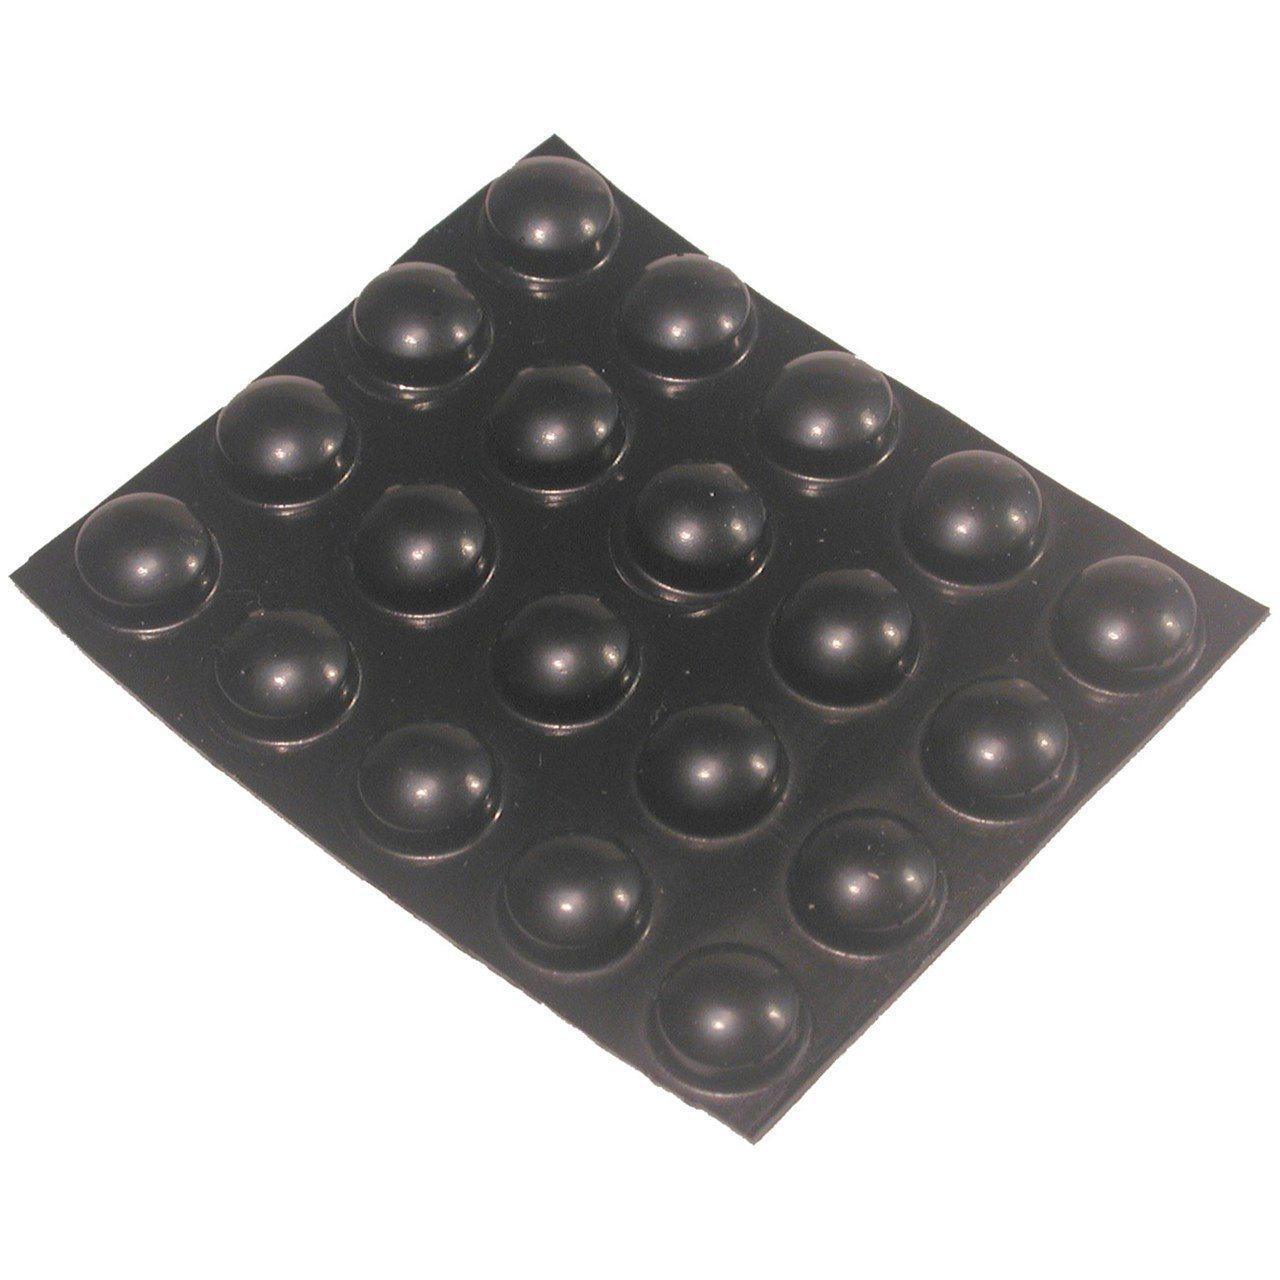 Bump Dots - Small, Black round or FLAT - 20 per package - The Low Vision Store